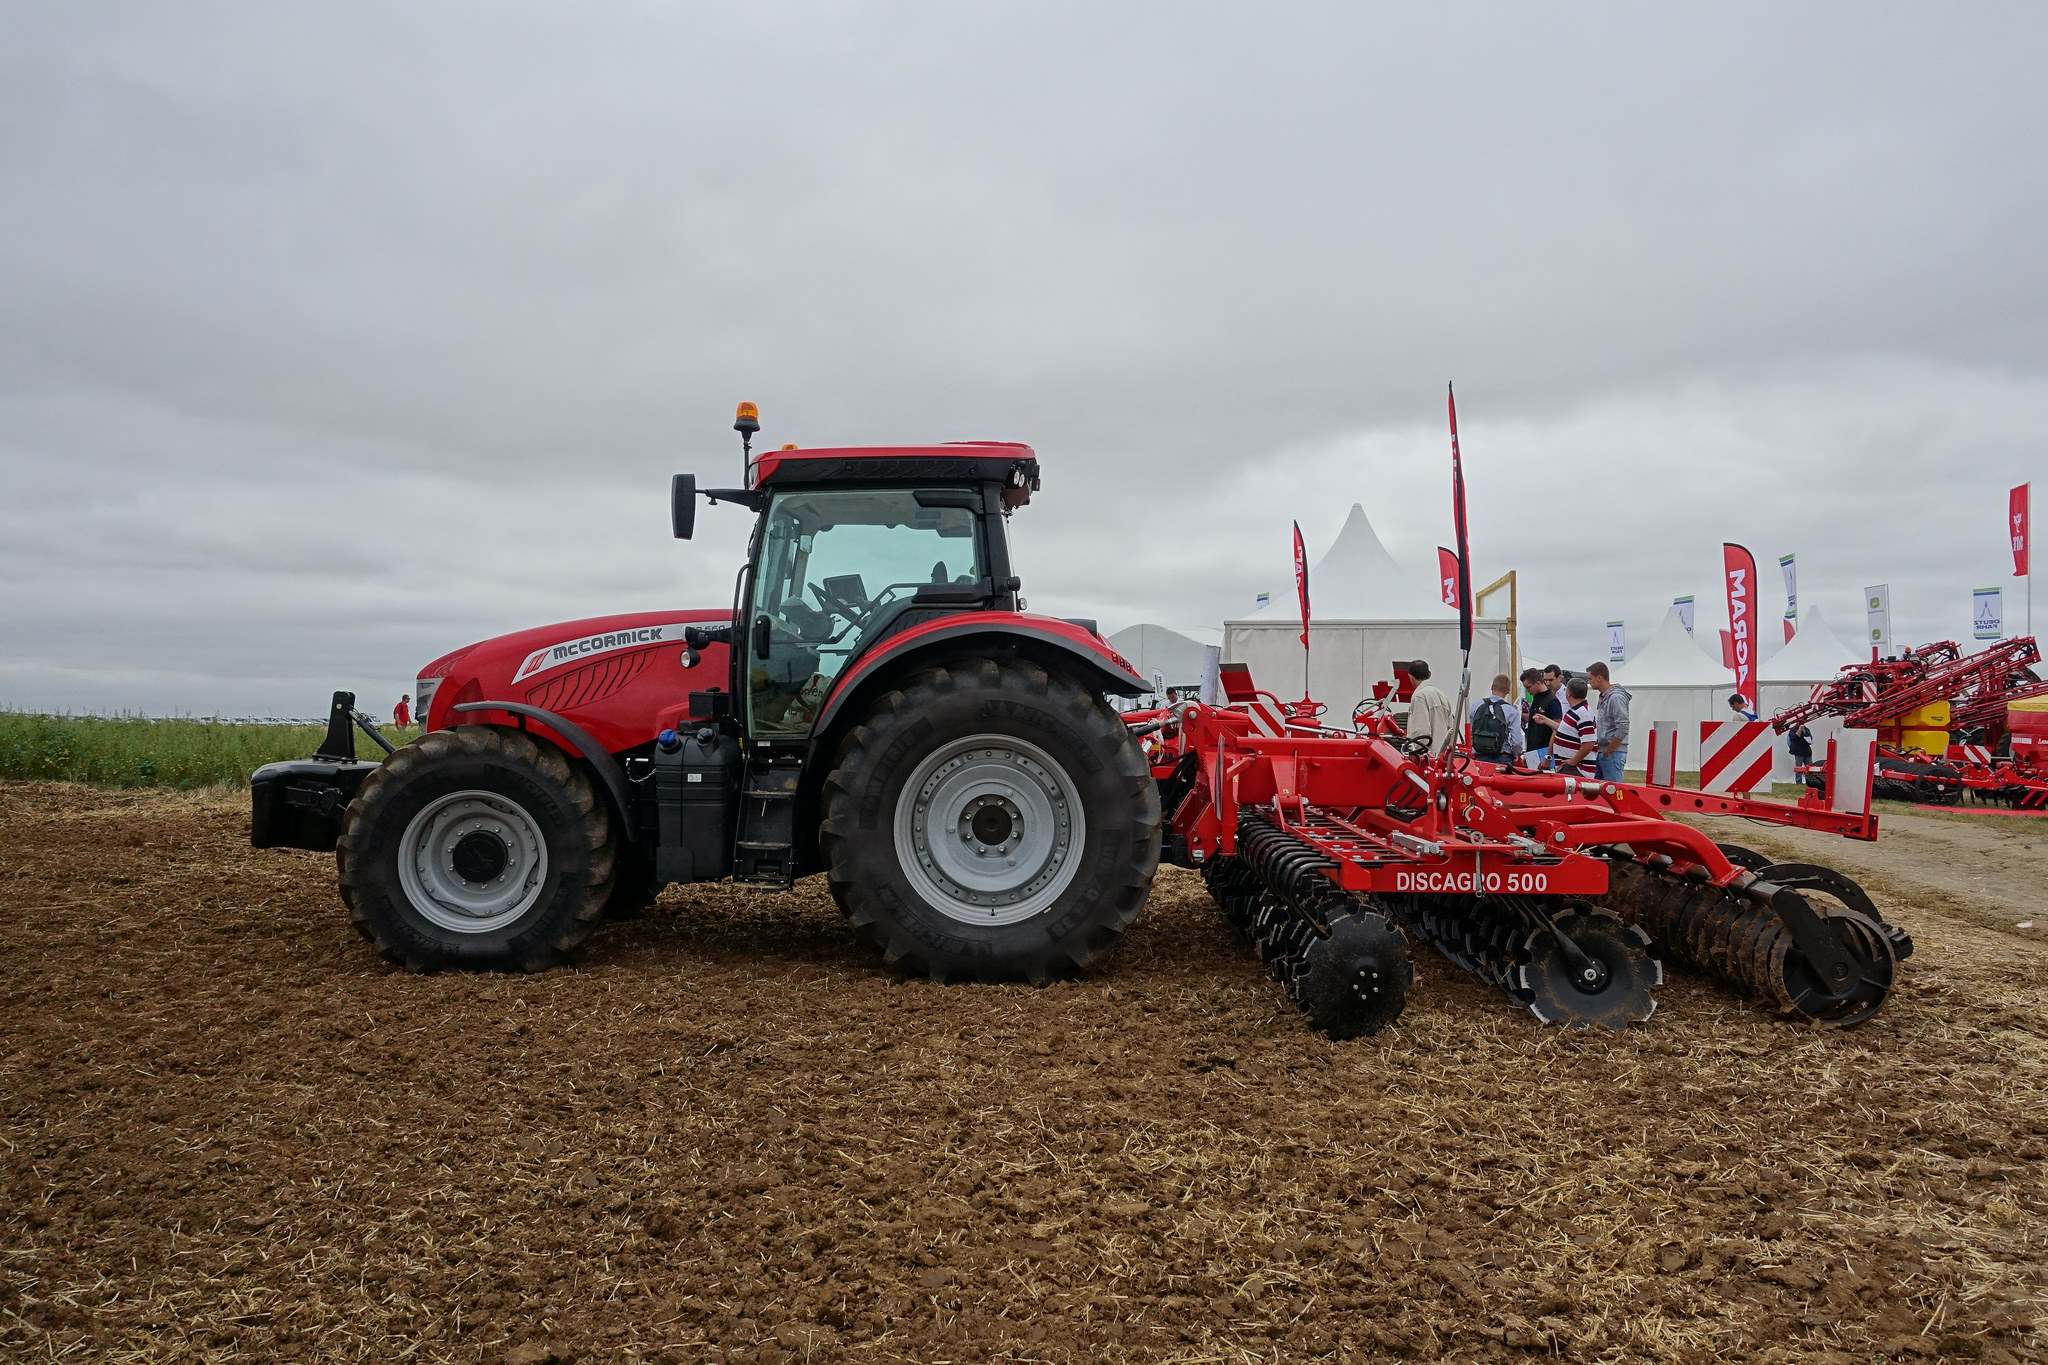 innov agri16 Innov agri 2016 Agriculture show in Outarville, France